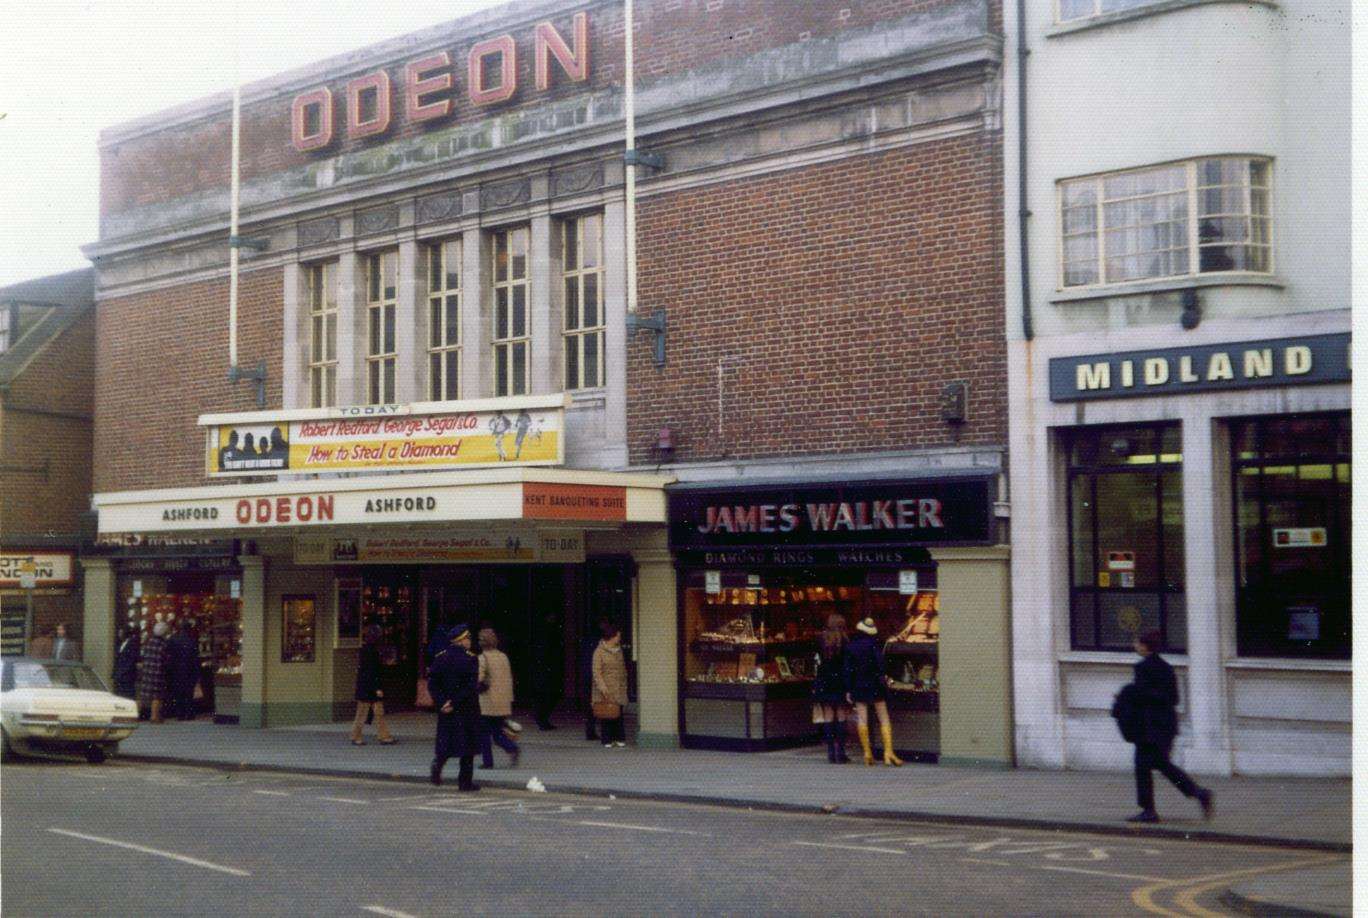 The Odeon opened in 1936 and closed in 1976. Picture: Steve Salter